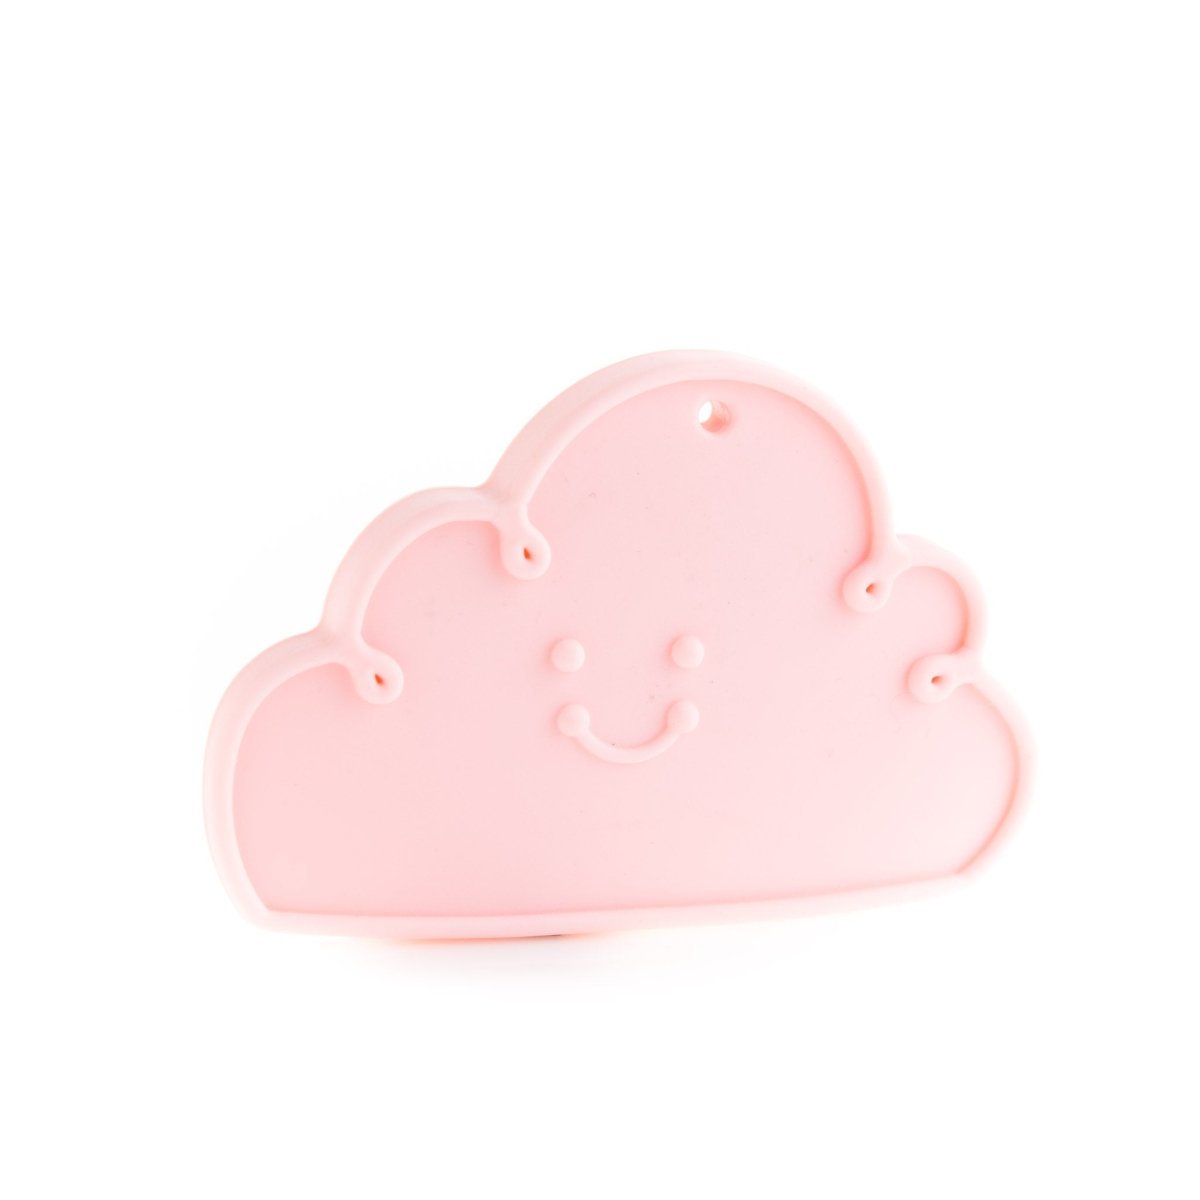 Silicone Teethers and Pendants Clouds Soft Pink from Cara & Co Craft Supply